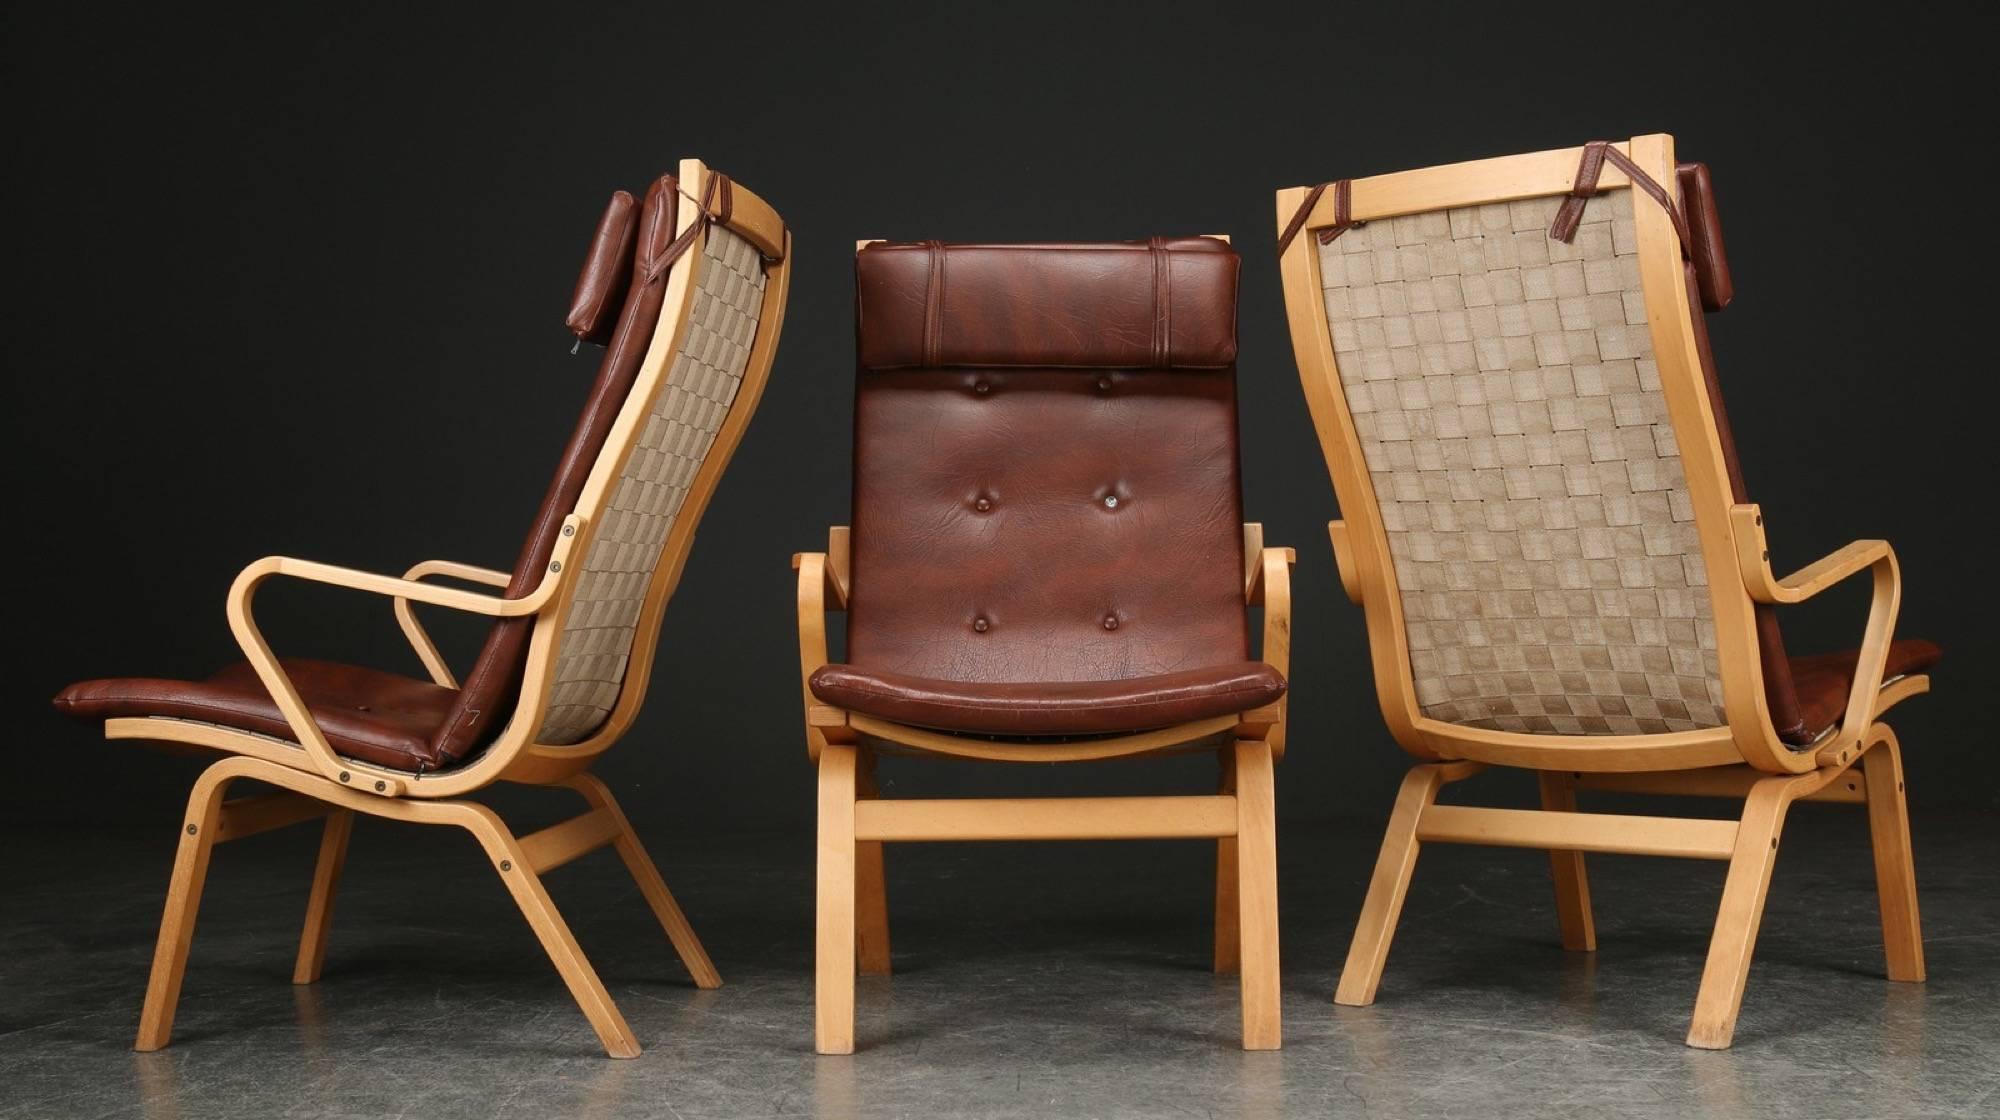 Three beechwood armchairs with form-bent beech frame, covered with brown leather. Comes with matching beech coffee table